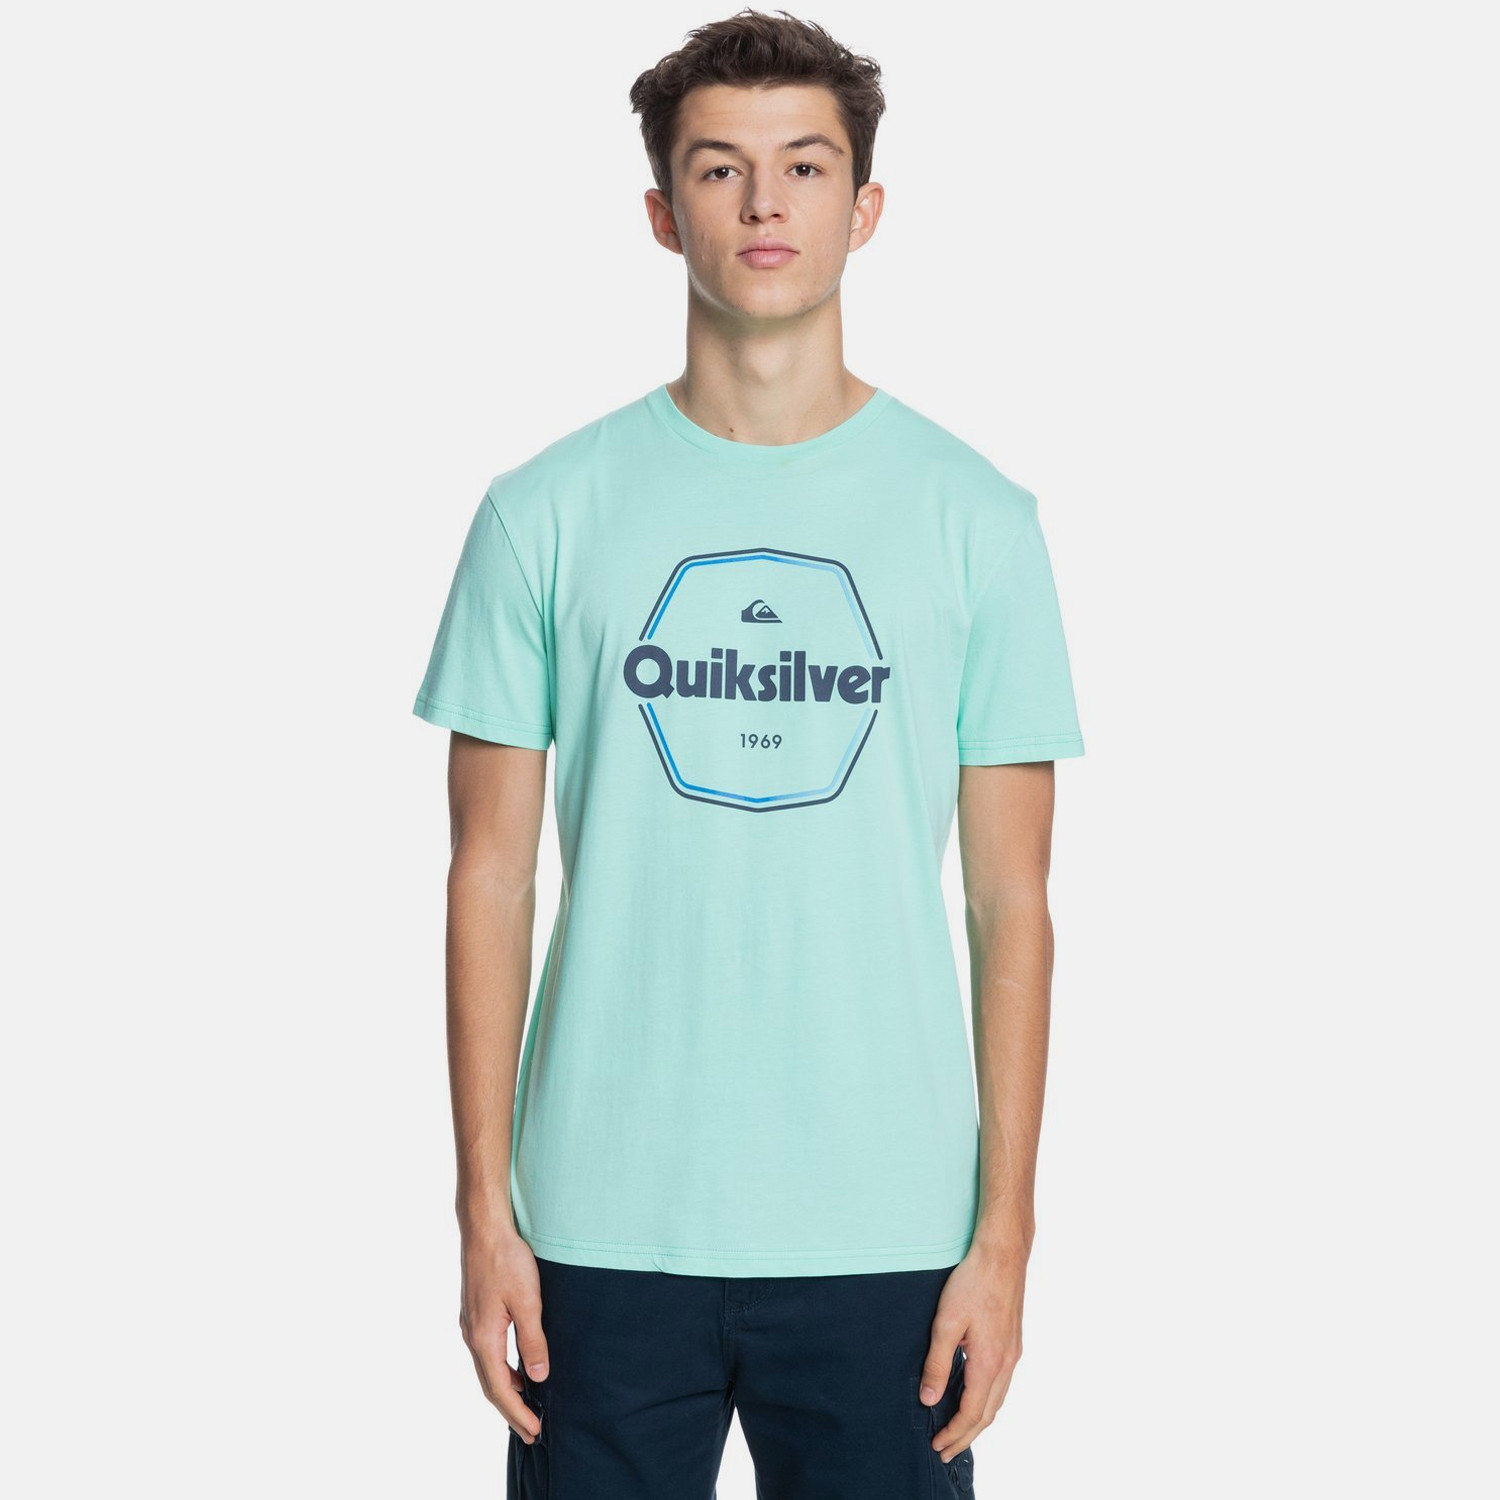 Quiksilver Hard Wired Ανδρικό T-Shirt (9000075649_47966)